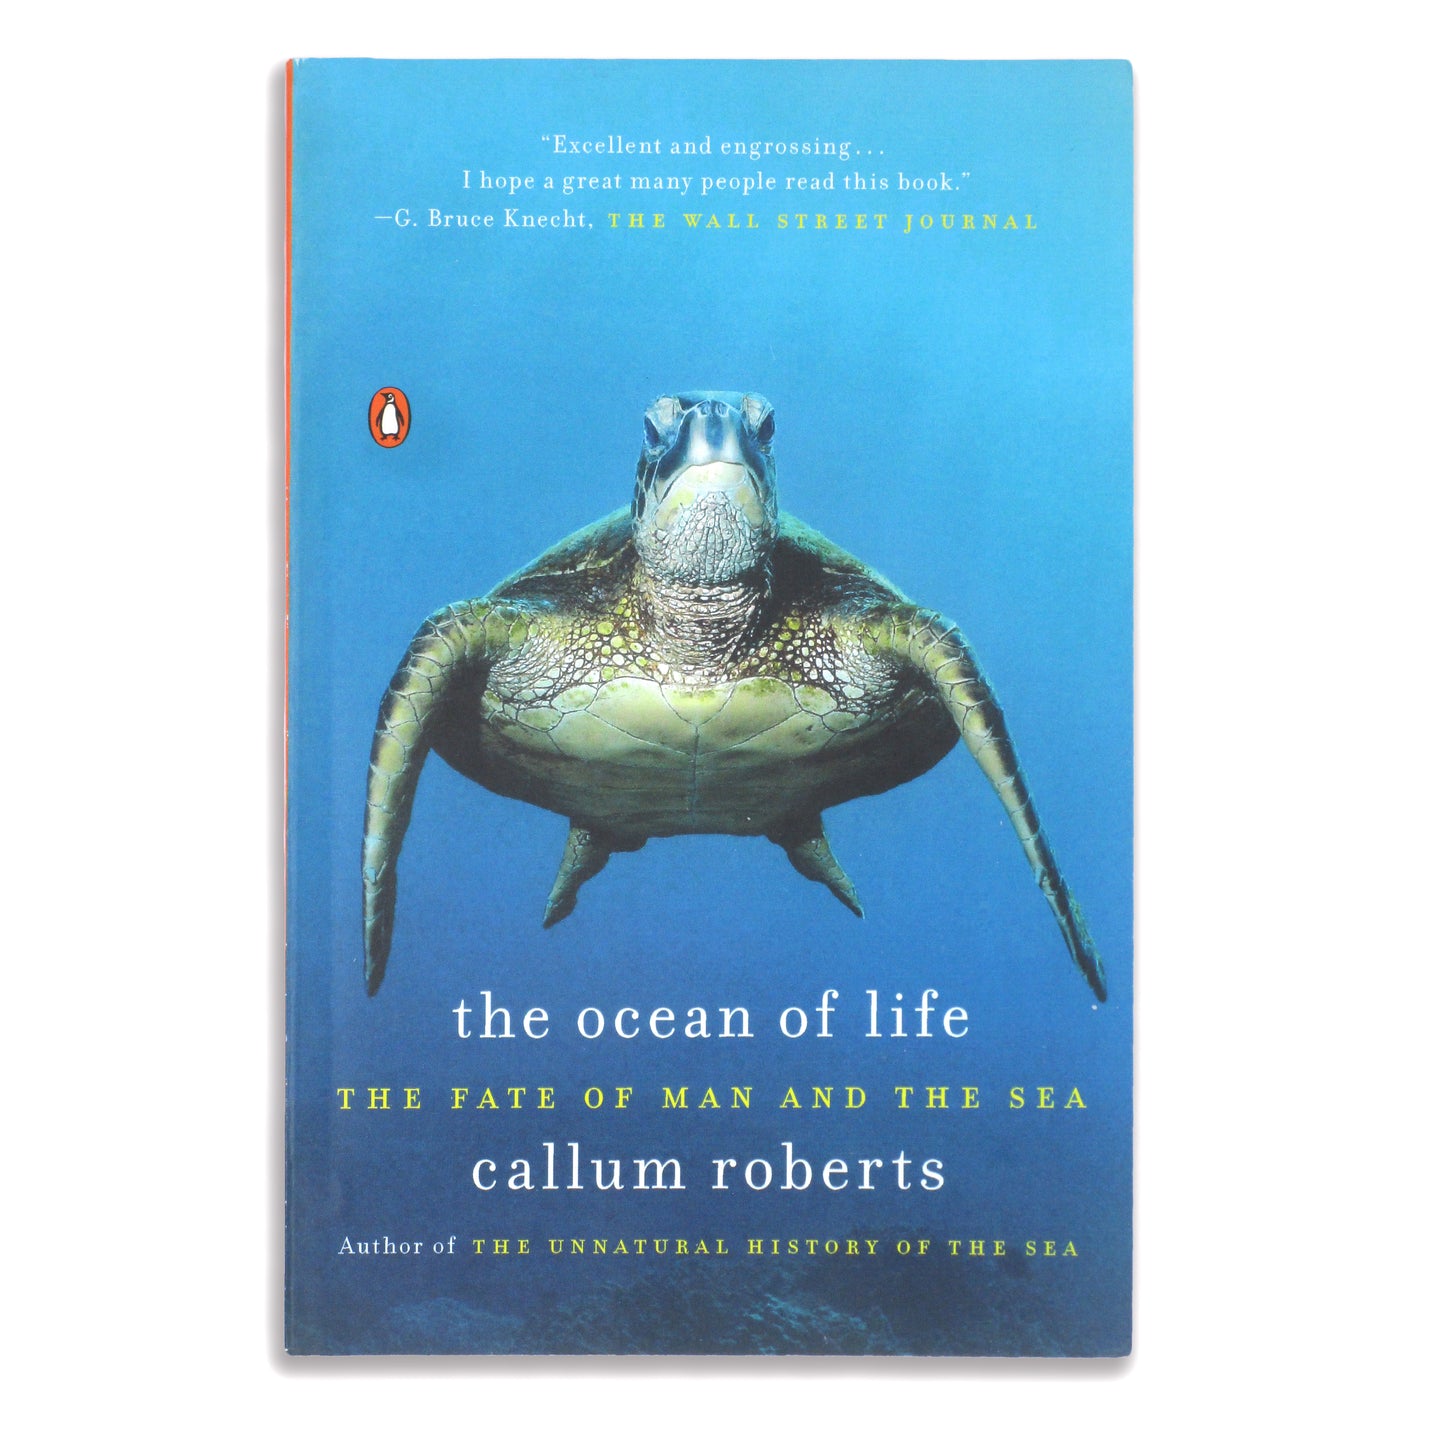 The Ocean of Life: The Fate of Man and the Sea - Callum Roberts (paperback)